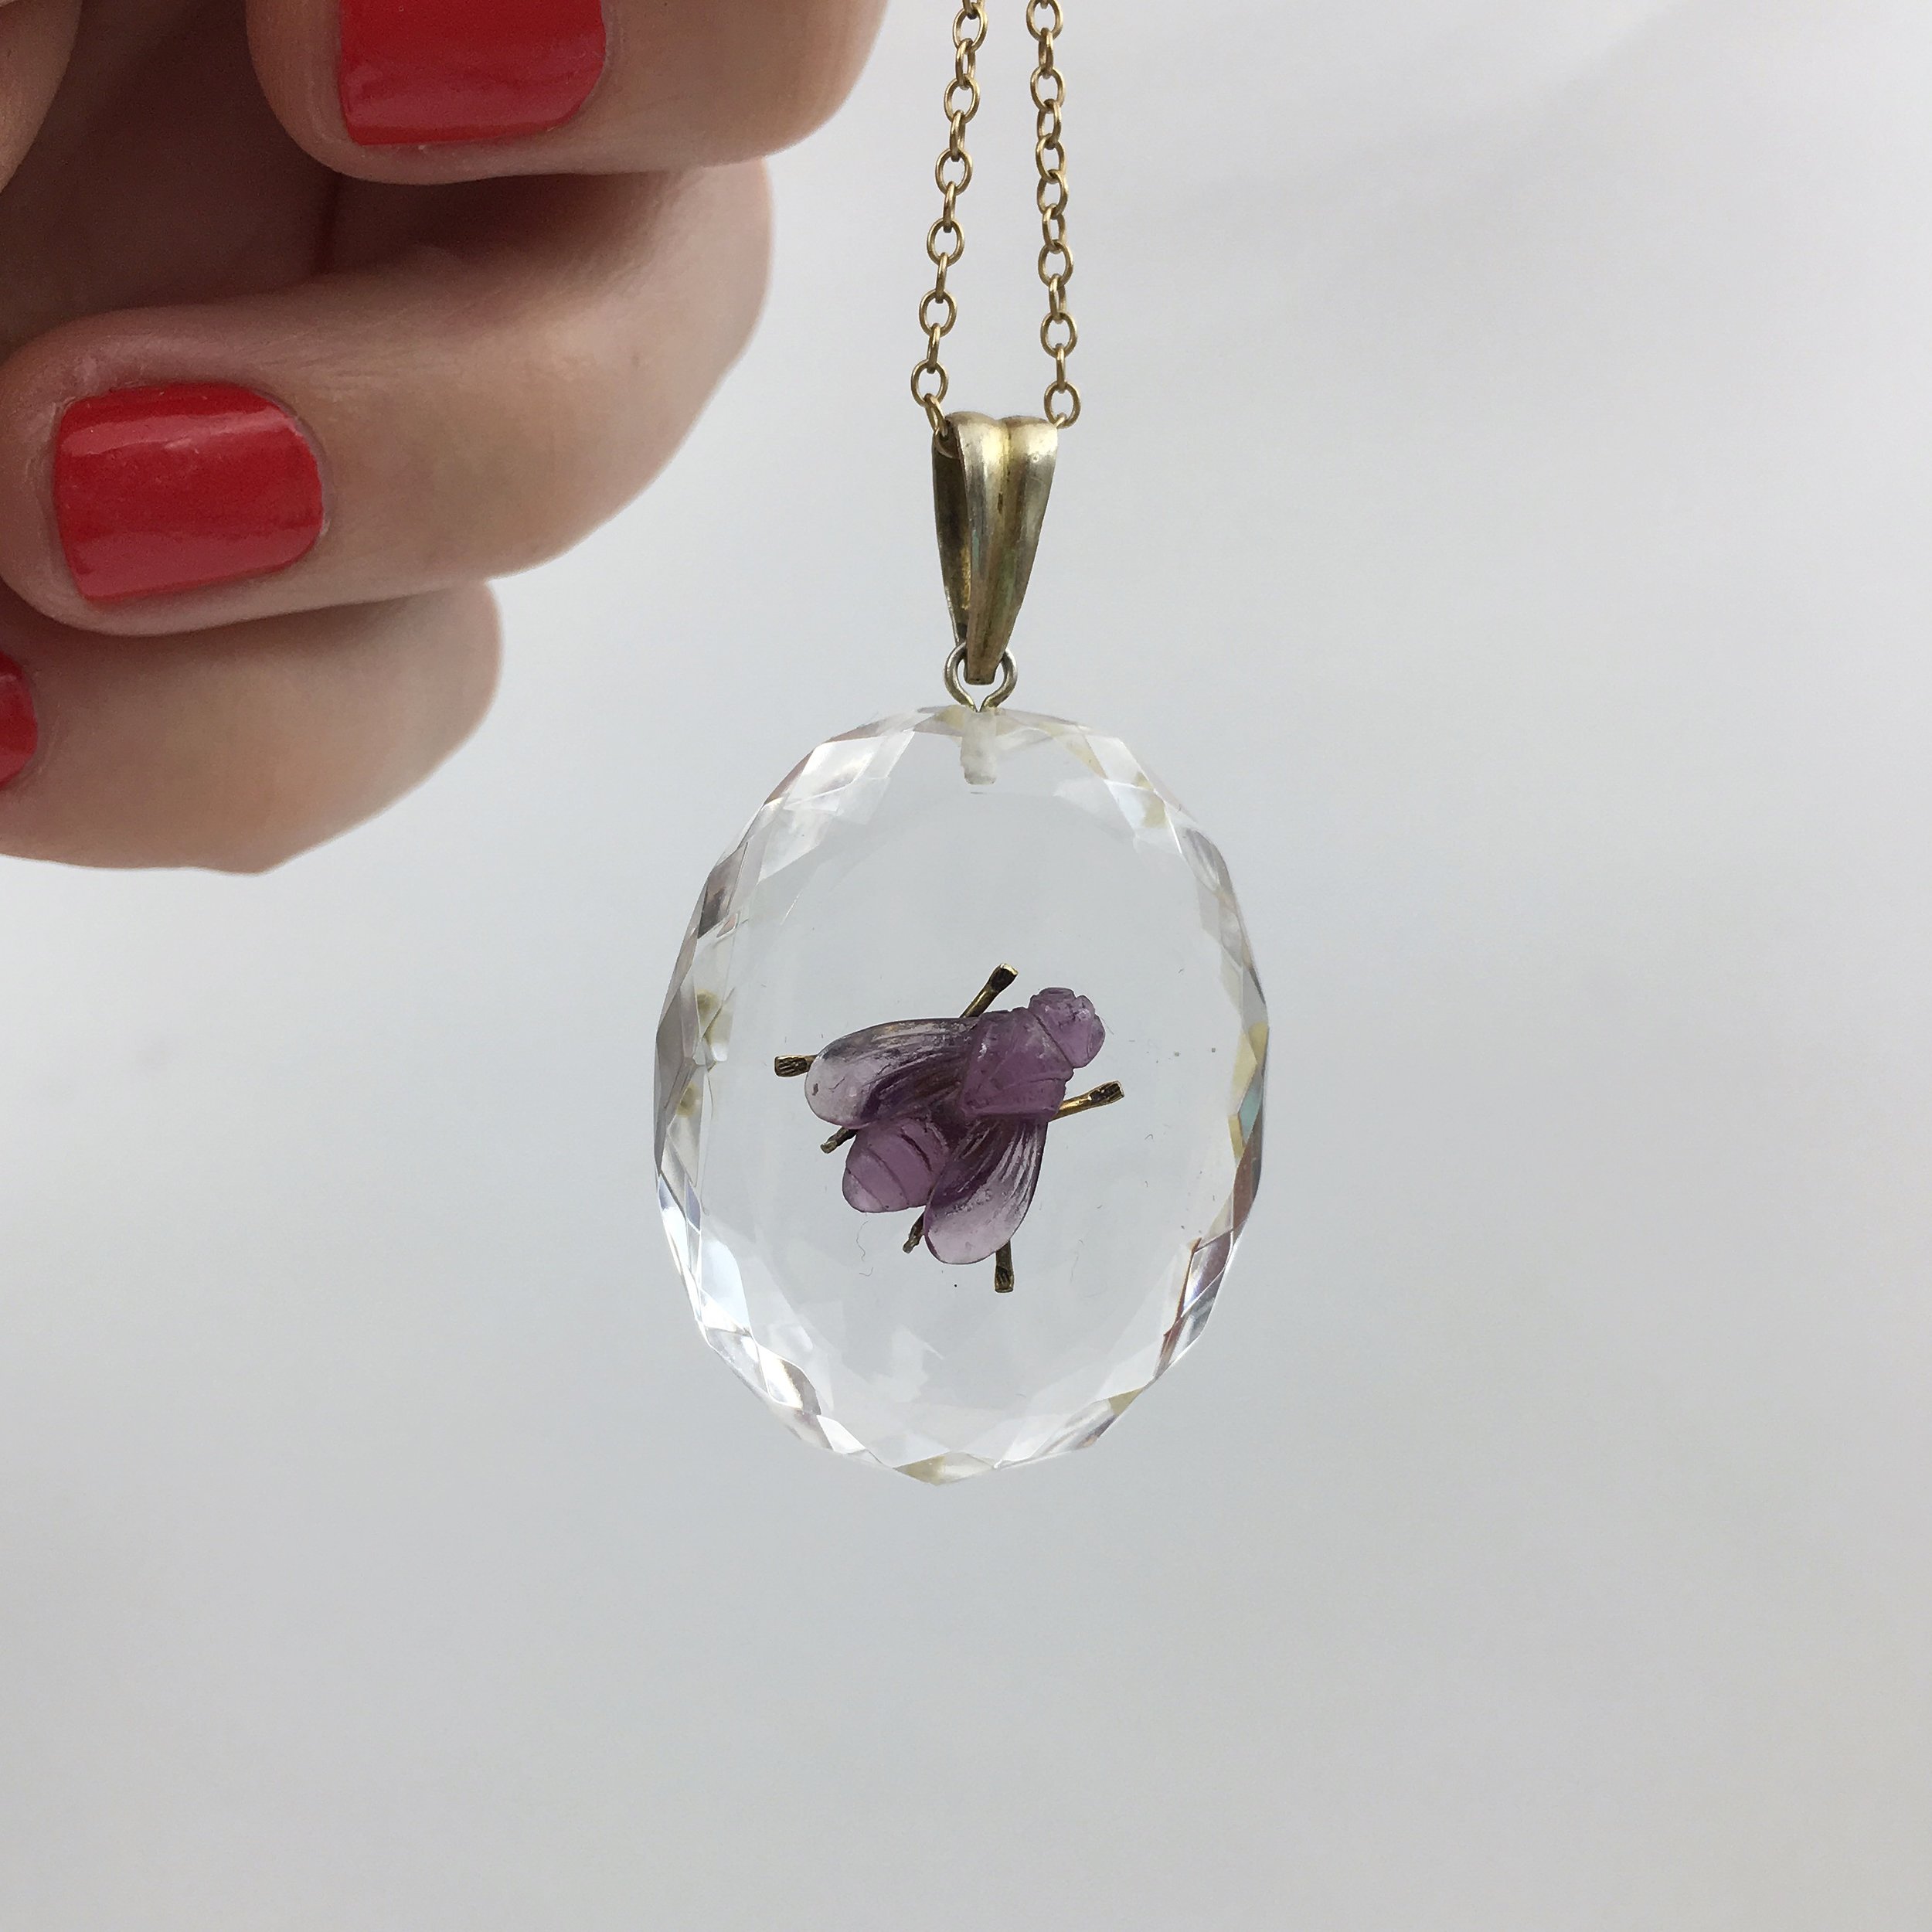 Details about  / Sterling silver Large Faceted Rock Crystal Pendant Dove Charm